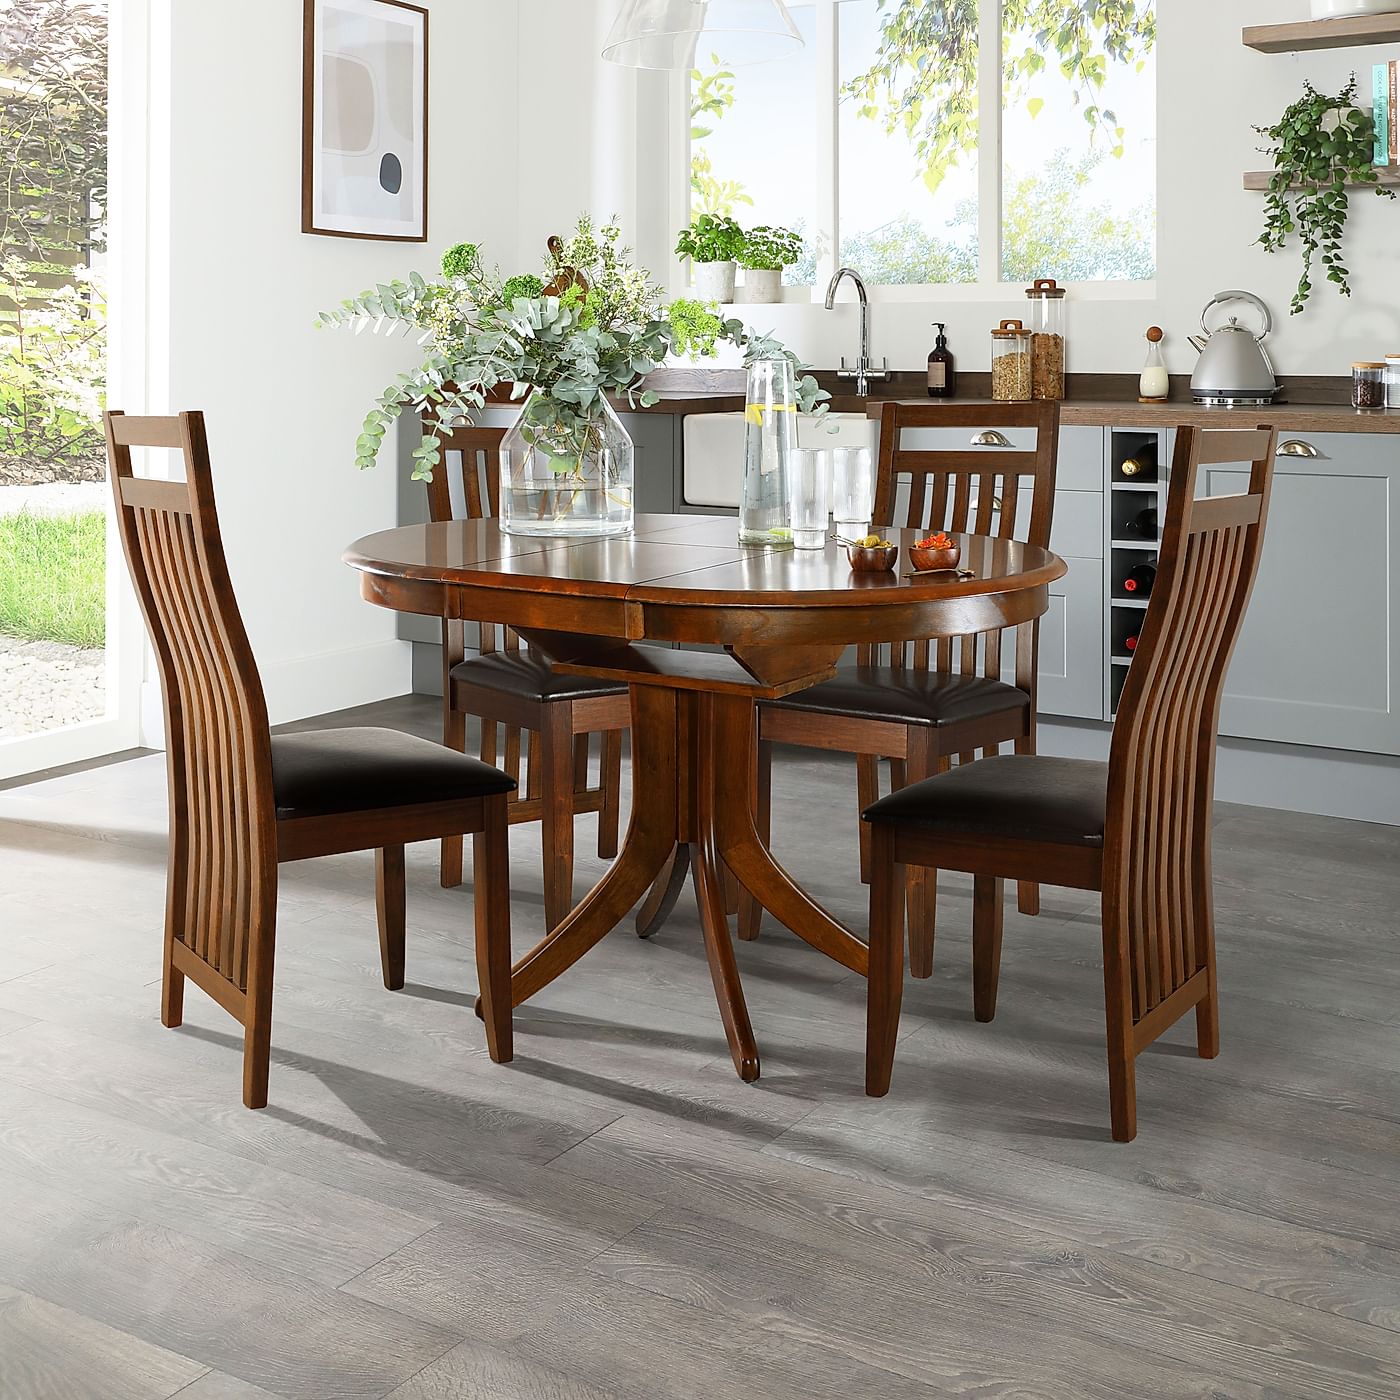 Hudson Round Dark Wood Extending Dining Table With 6 Java Chairs Brown Leather Seat Pads Furniture Choice